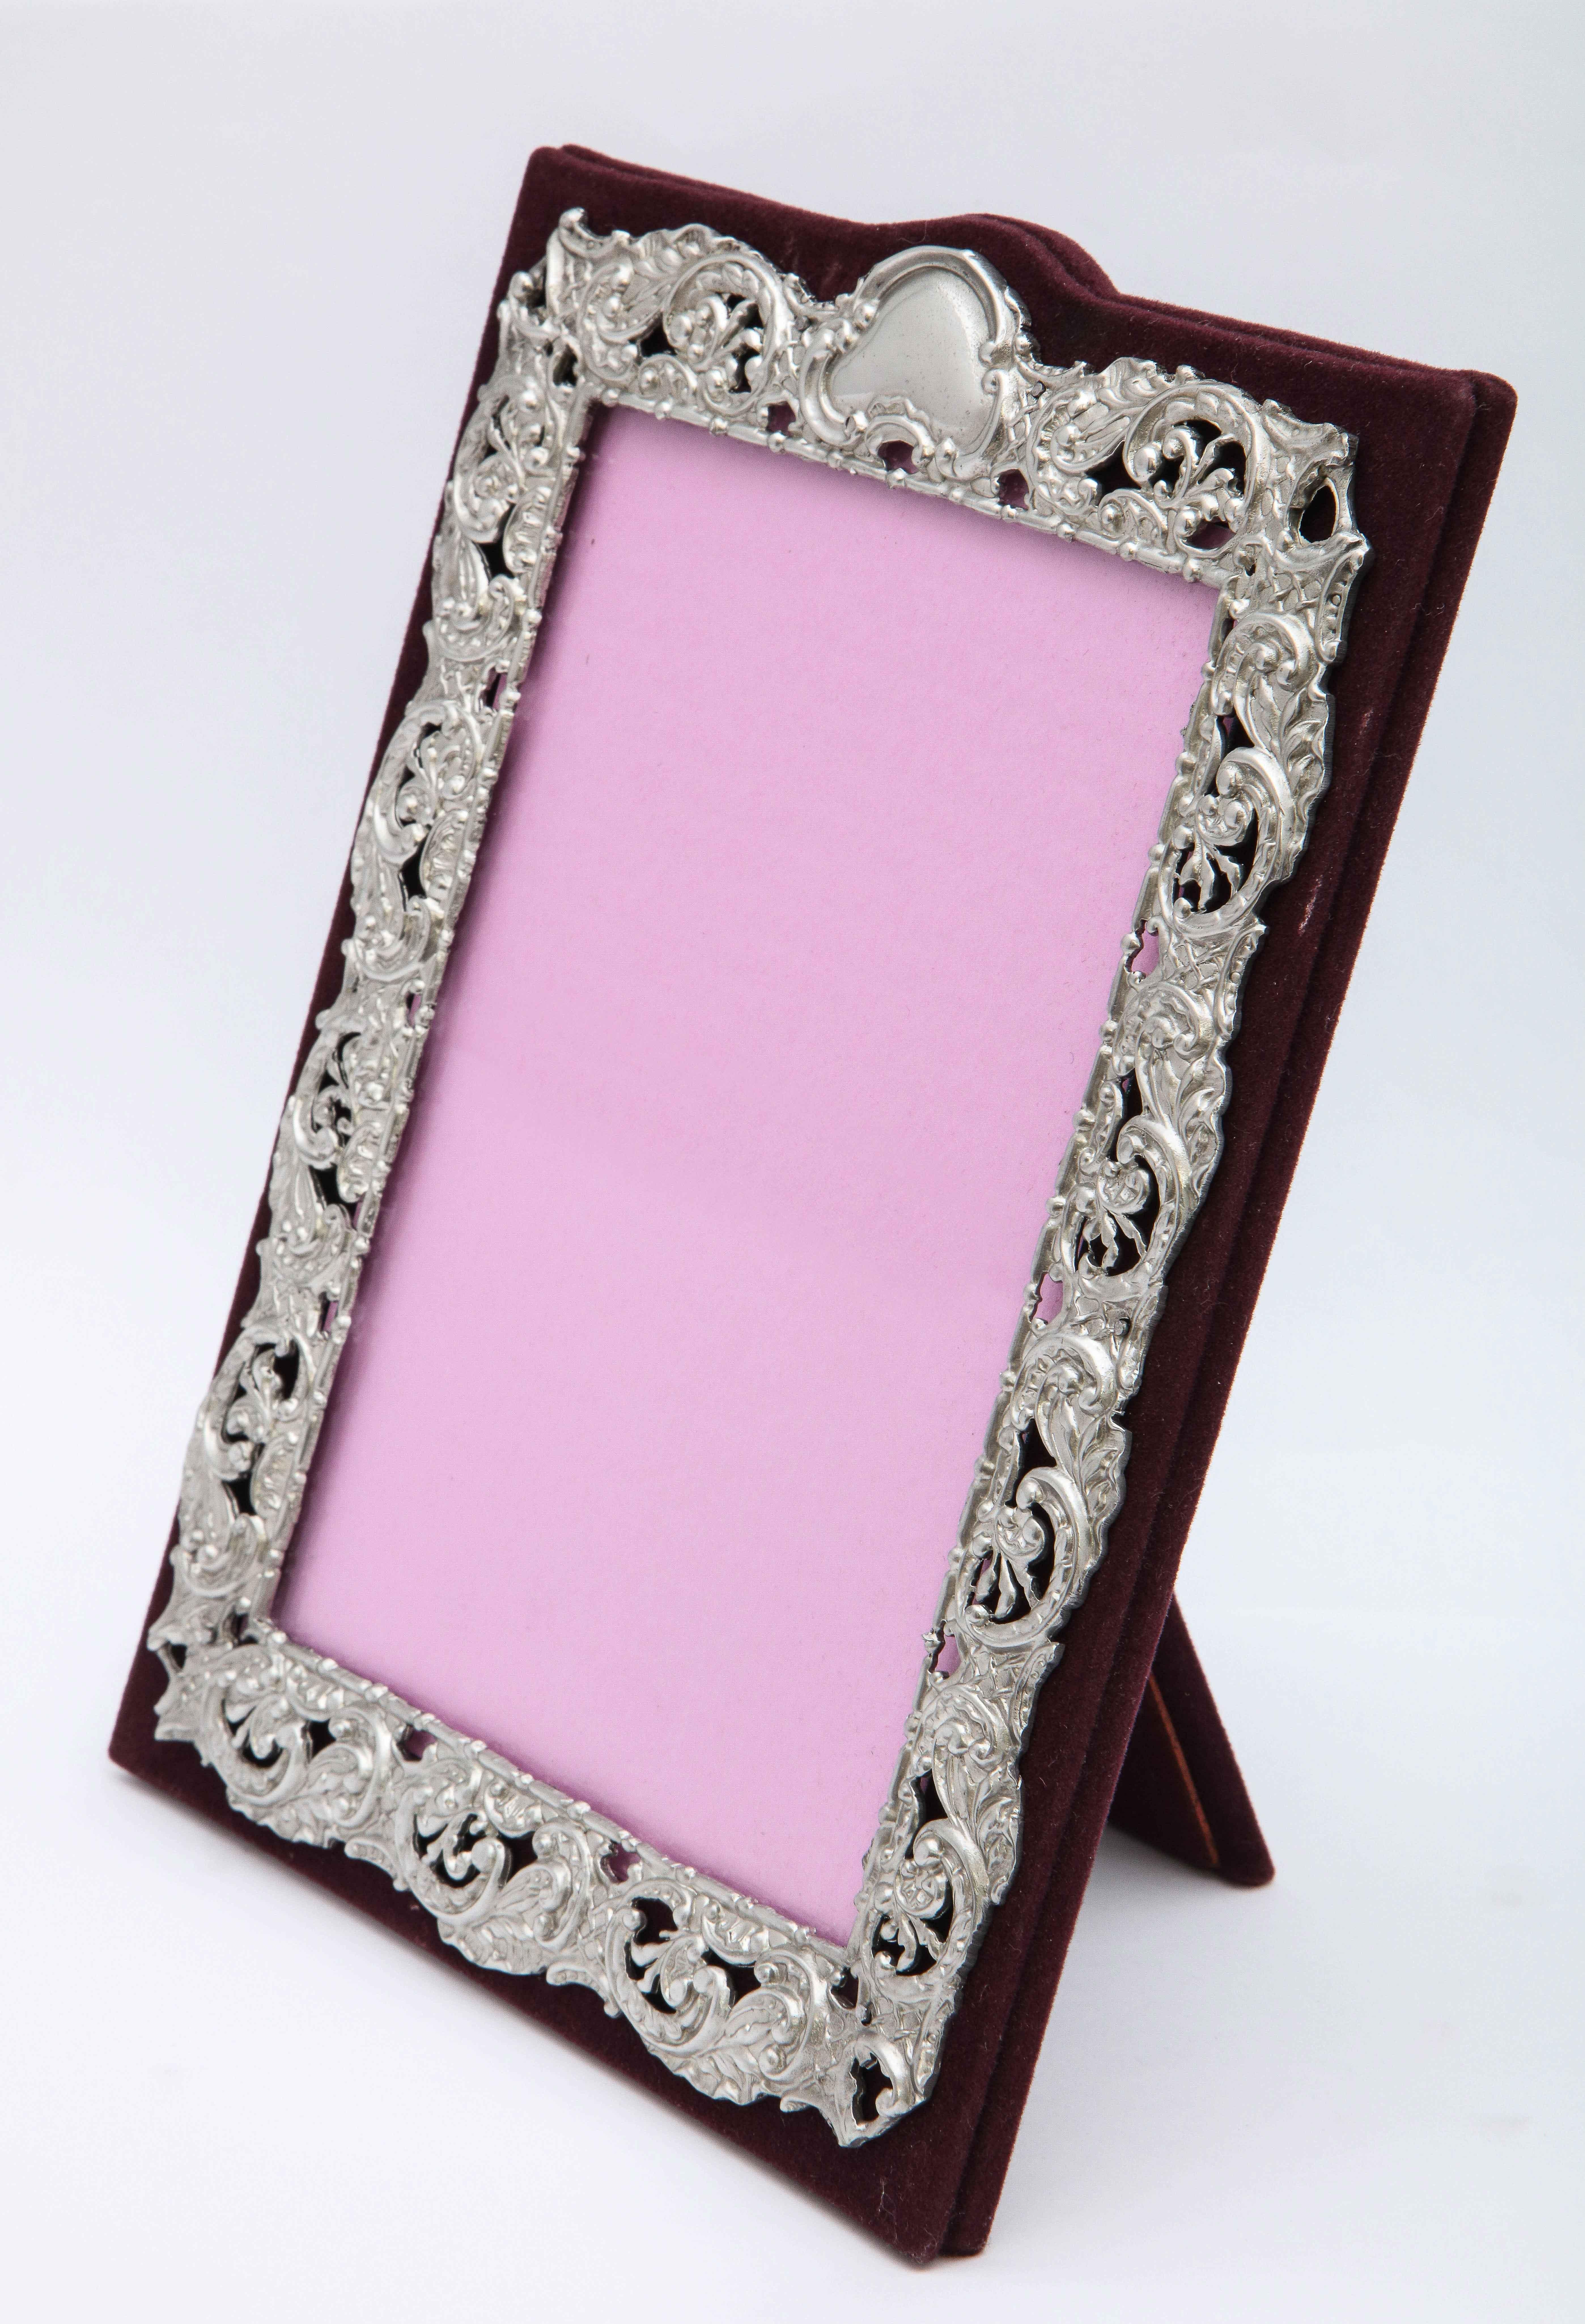 Victorian, sterling silver -mounted (on burgundy velvet) picture frame, Birmingham, England, year-hallmarked for 1898, Deakin and Francis - makers. Sterling silver has a matte finish, and is pierced so that the burgundy velvet shows through. Frame